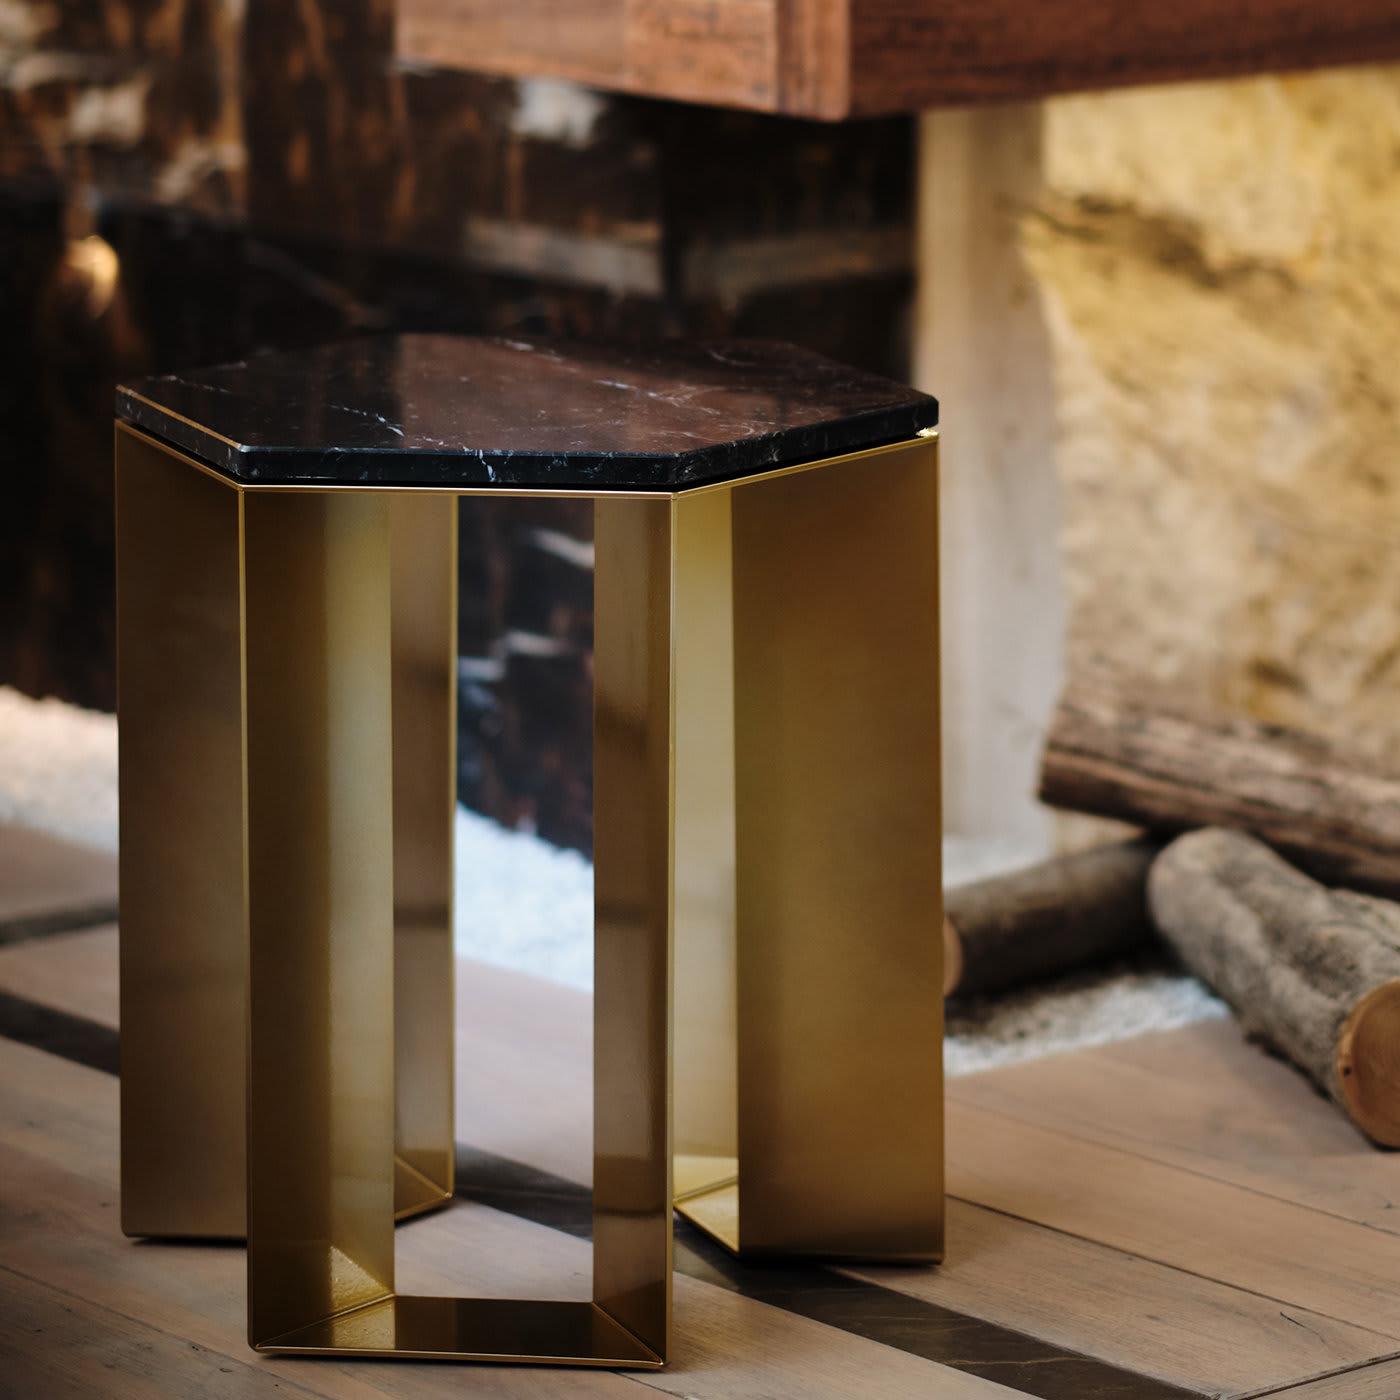 Elegant in its simple and balanced design, this side table belongs to a refined series created by artist Antonio Saporito for contemporary interiors. Clean and essential, it features a metal base lacquered in a golden hue composed of light and